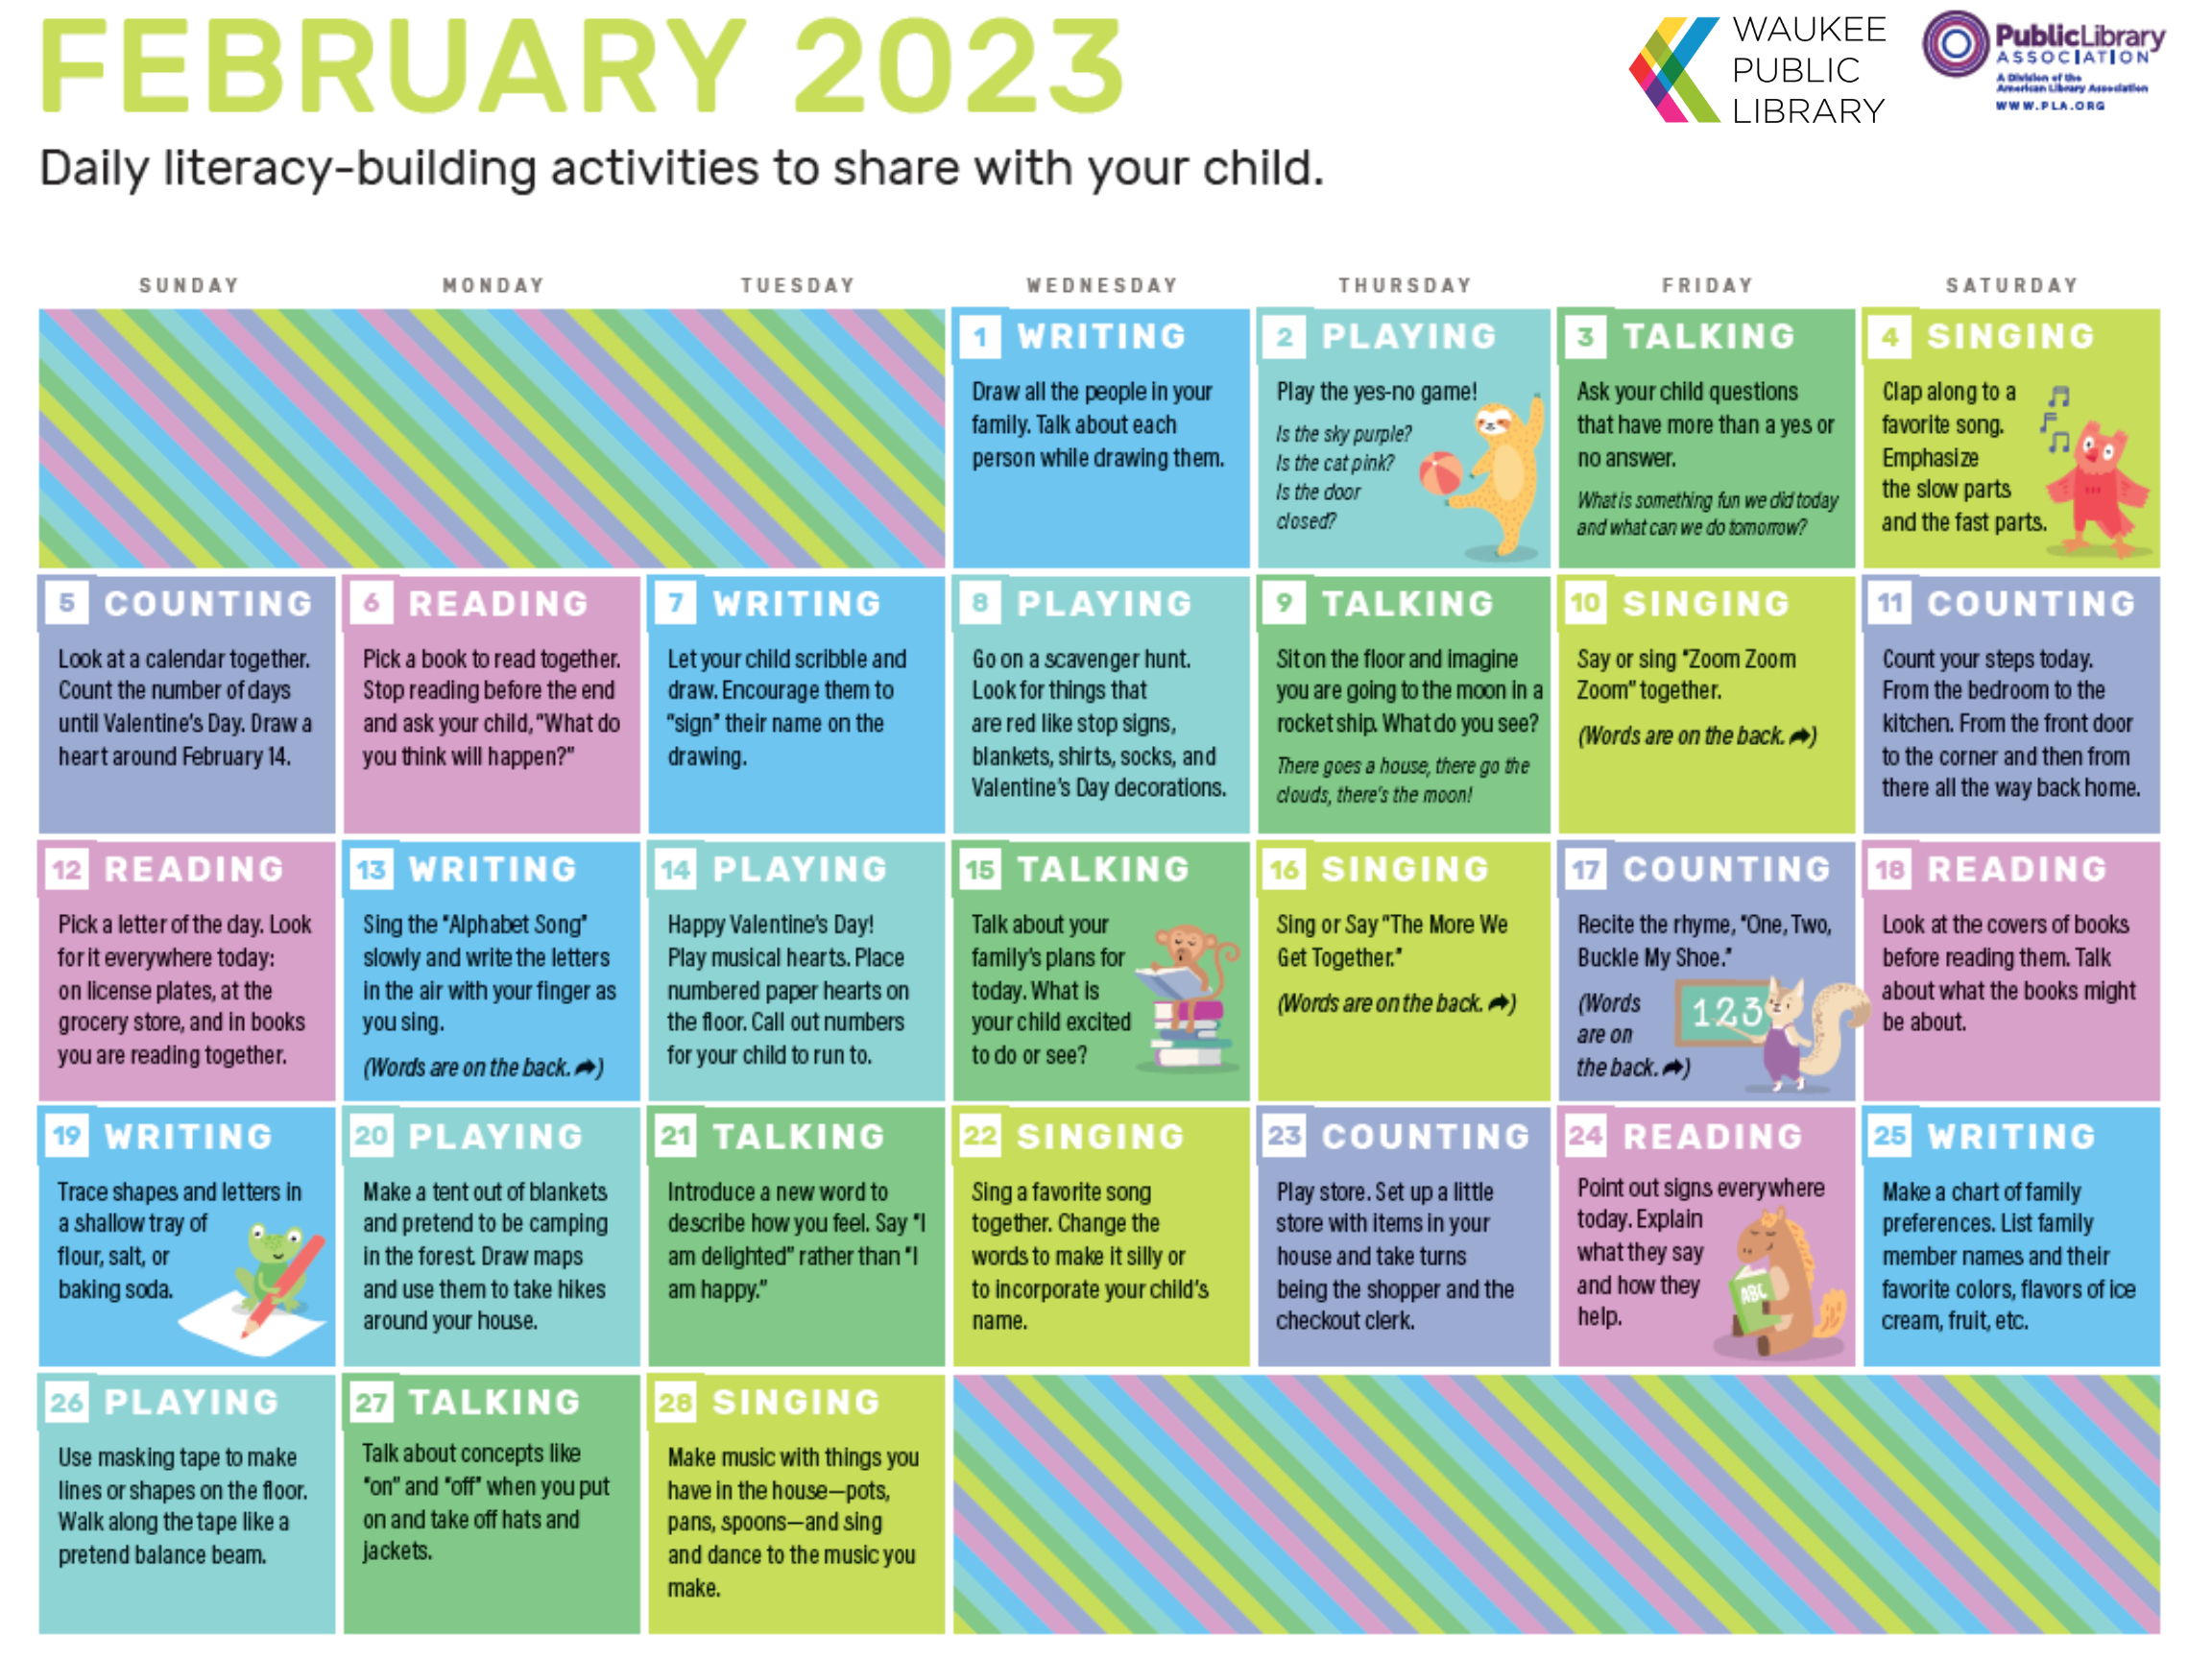 Image of February 2023 Early Learning Calendar.